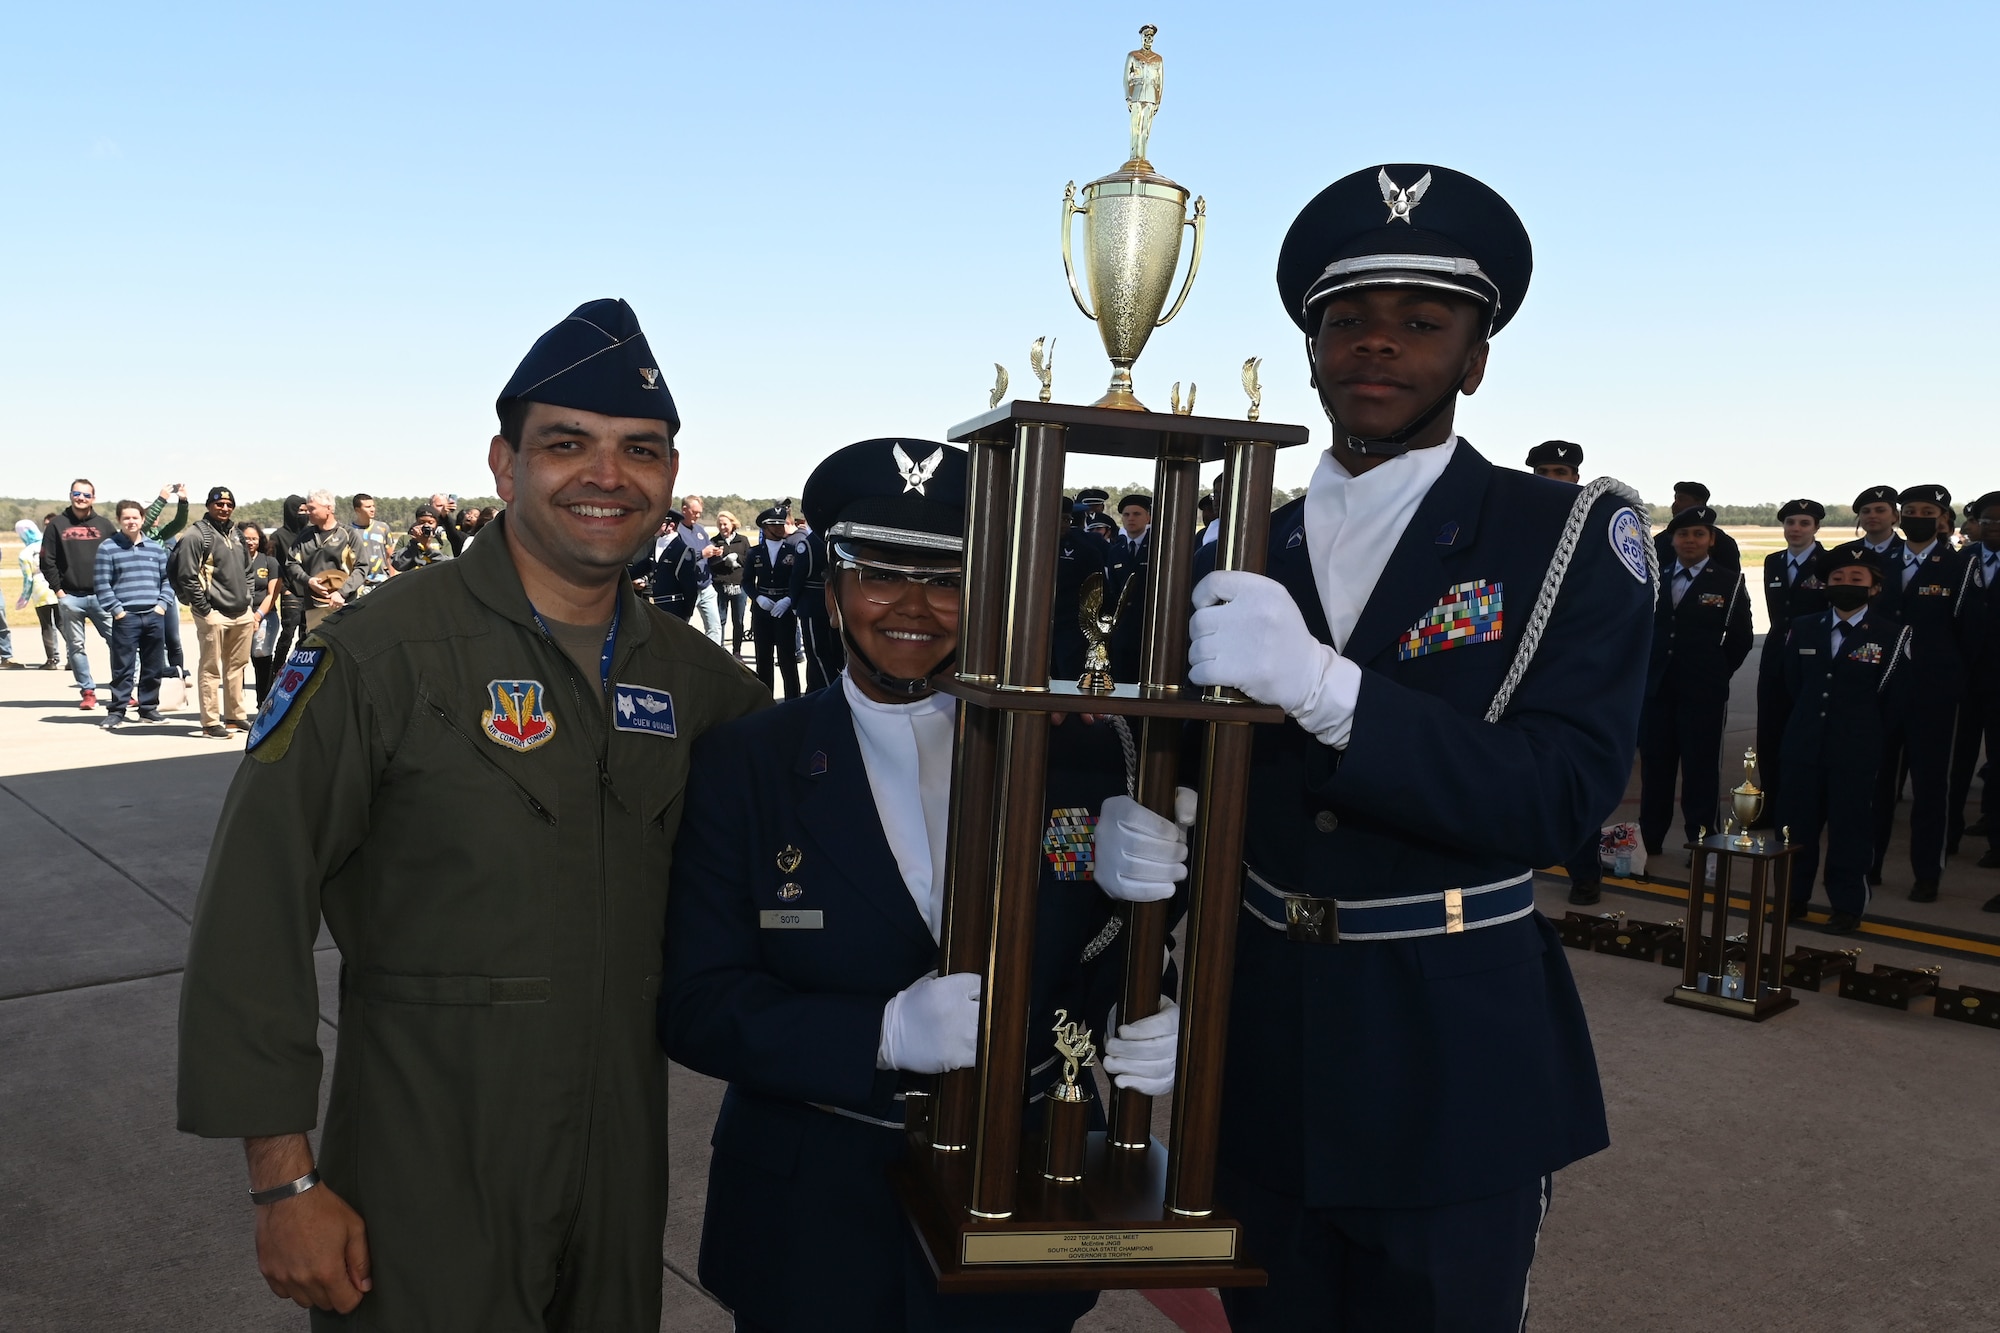 U.S. Air Force Col. Quaid Quadri, 169th Fighter Wing commander, presents the second overall trophy for the competition to Spring Valley High School during the annual Top Gun Drill Meet at McEntire Joint National Guard Base, South Carolina, March 26, 2022. High School Junior Reserve Officers Training Corps cadets from twenty high schools from across the state competed in twelve drill and ceremony events sponsored by the South Carolina Air National Guard. (U.S. Air National Guard photo by Senior Master Sgt. Edward Snyder)